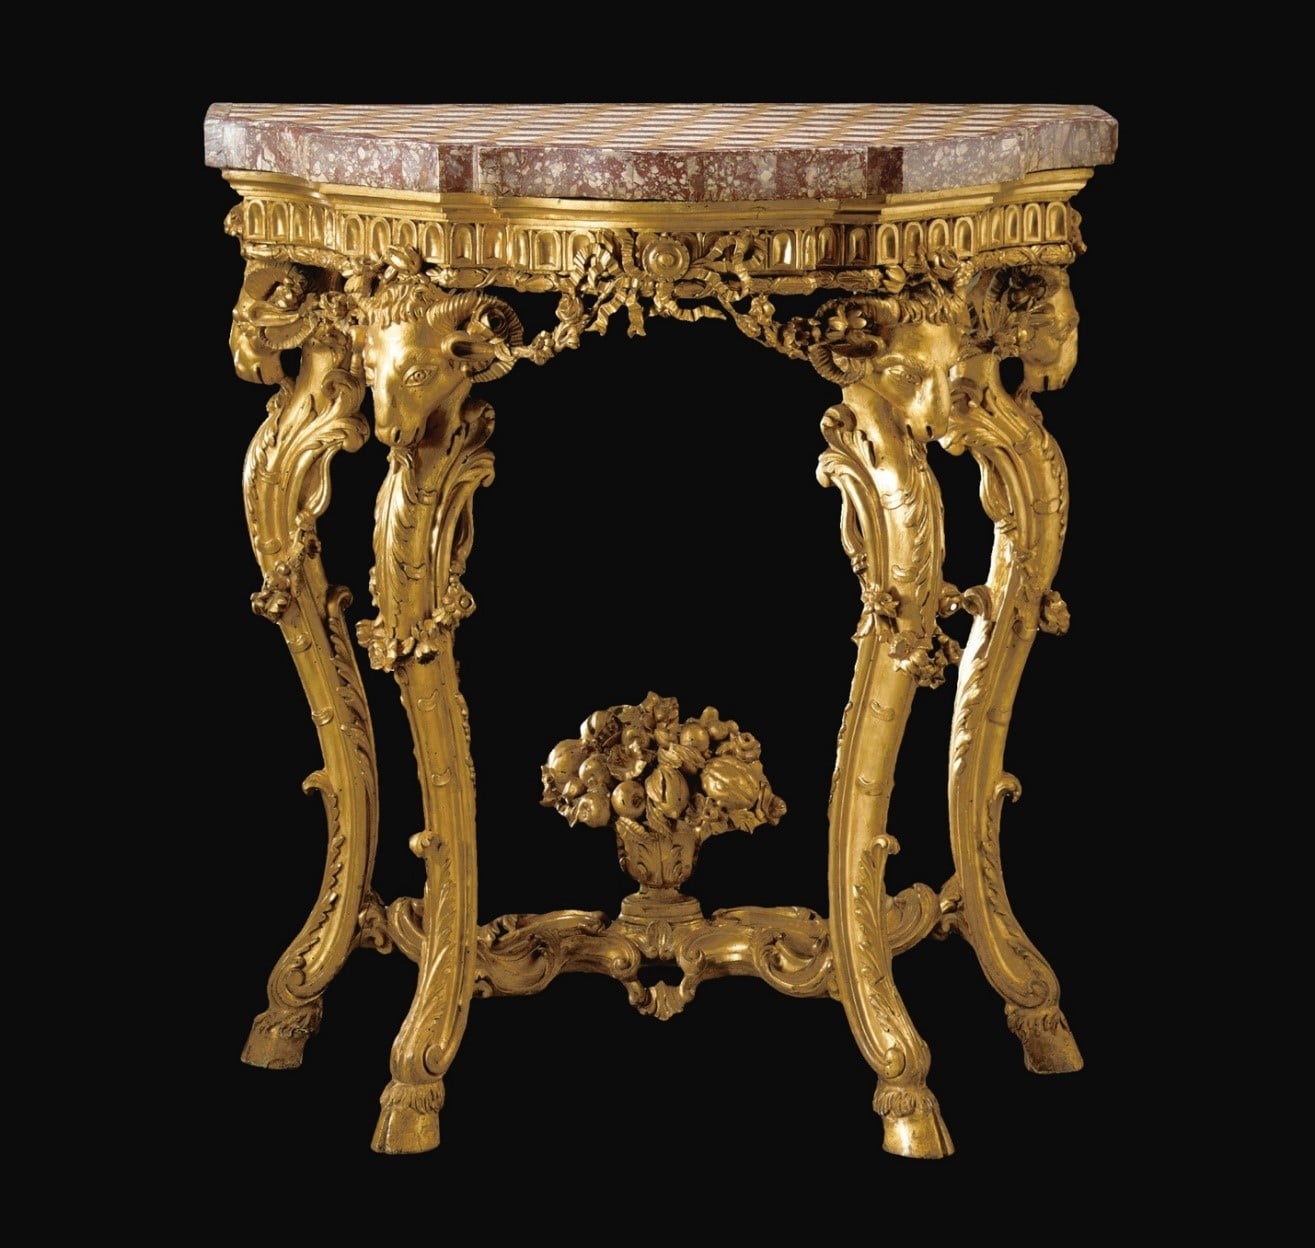 a decorative side table with a marble top and carved legs in the shape of rams